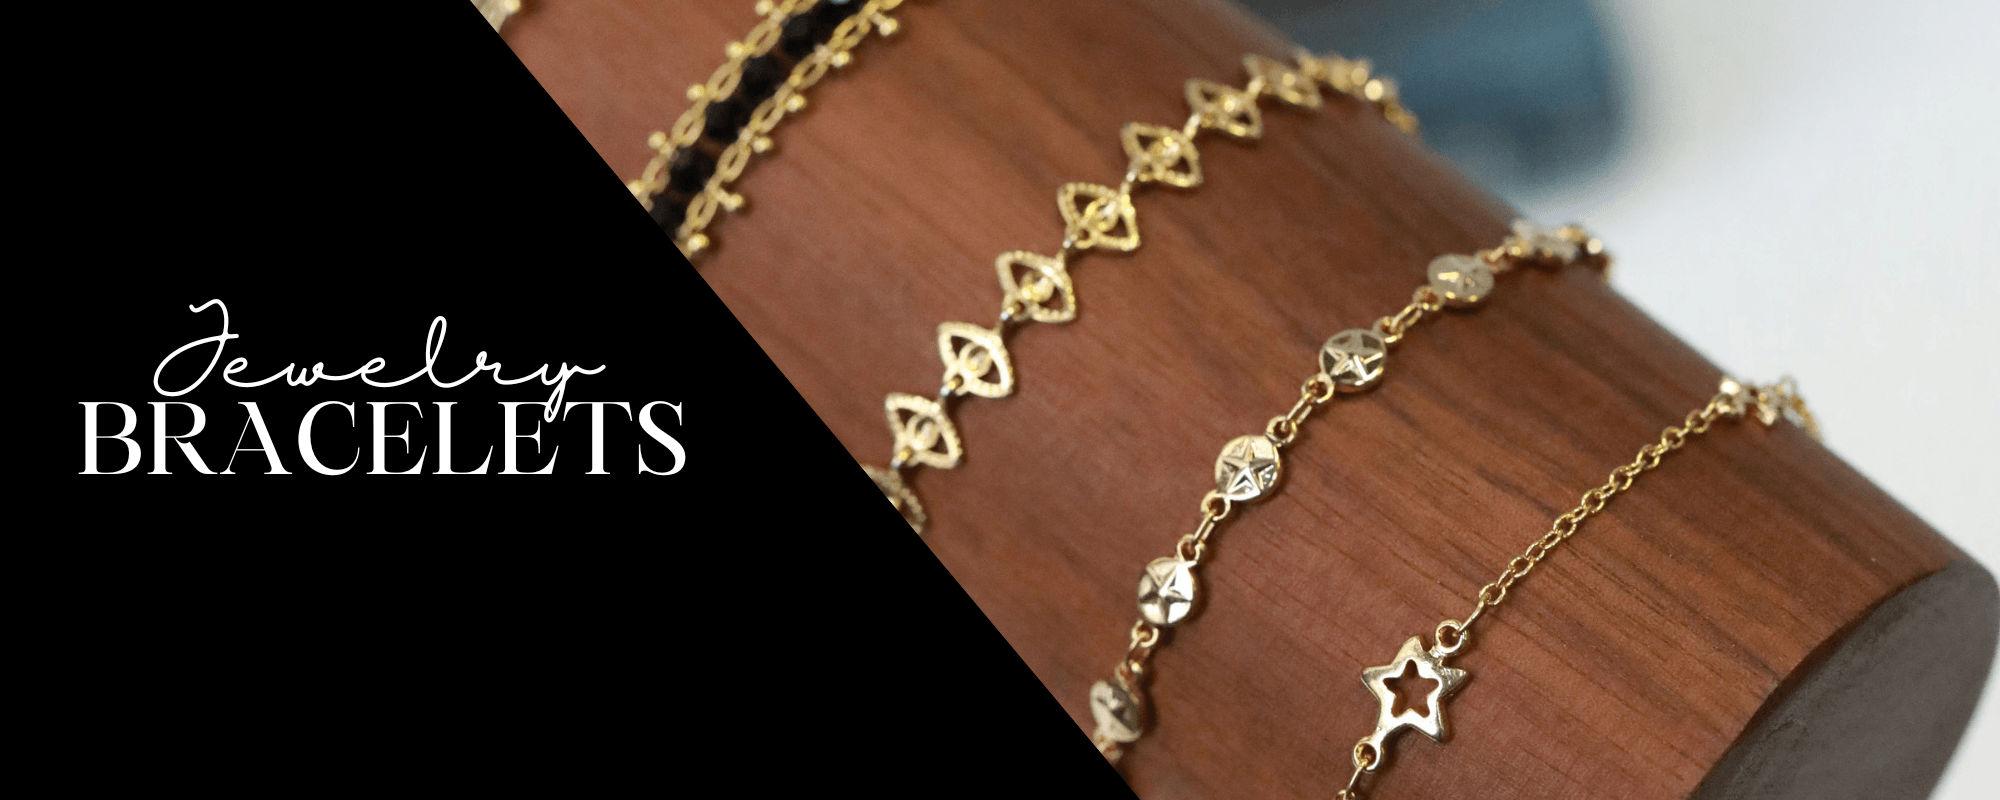 gilded witch bracelets collection header  image